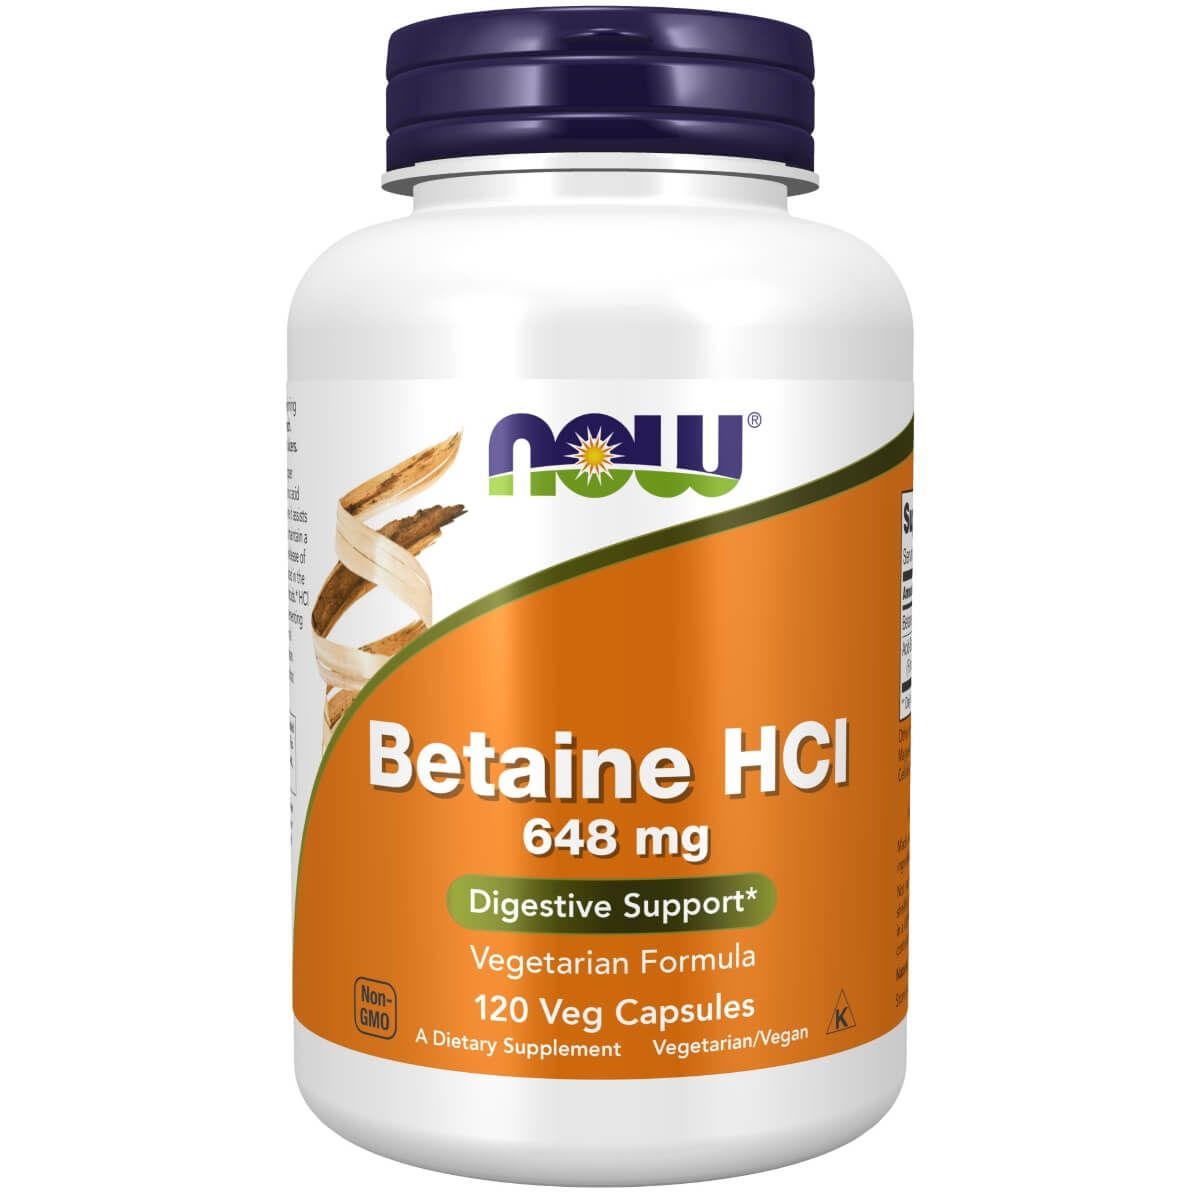 Photos - Vitamins & Minerals Now Foods Betaine HCl 648 mg 120 Veg Capsules PBW-P24993 